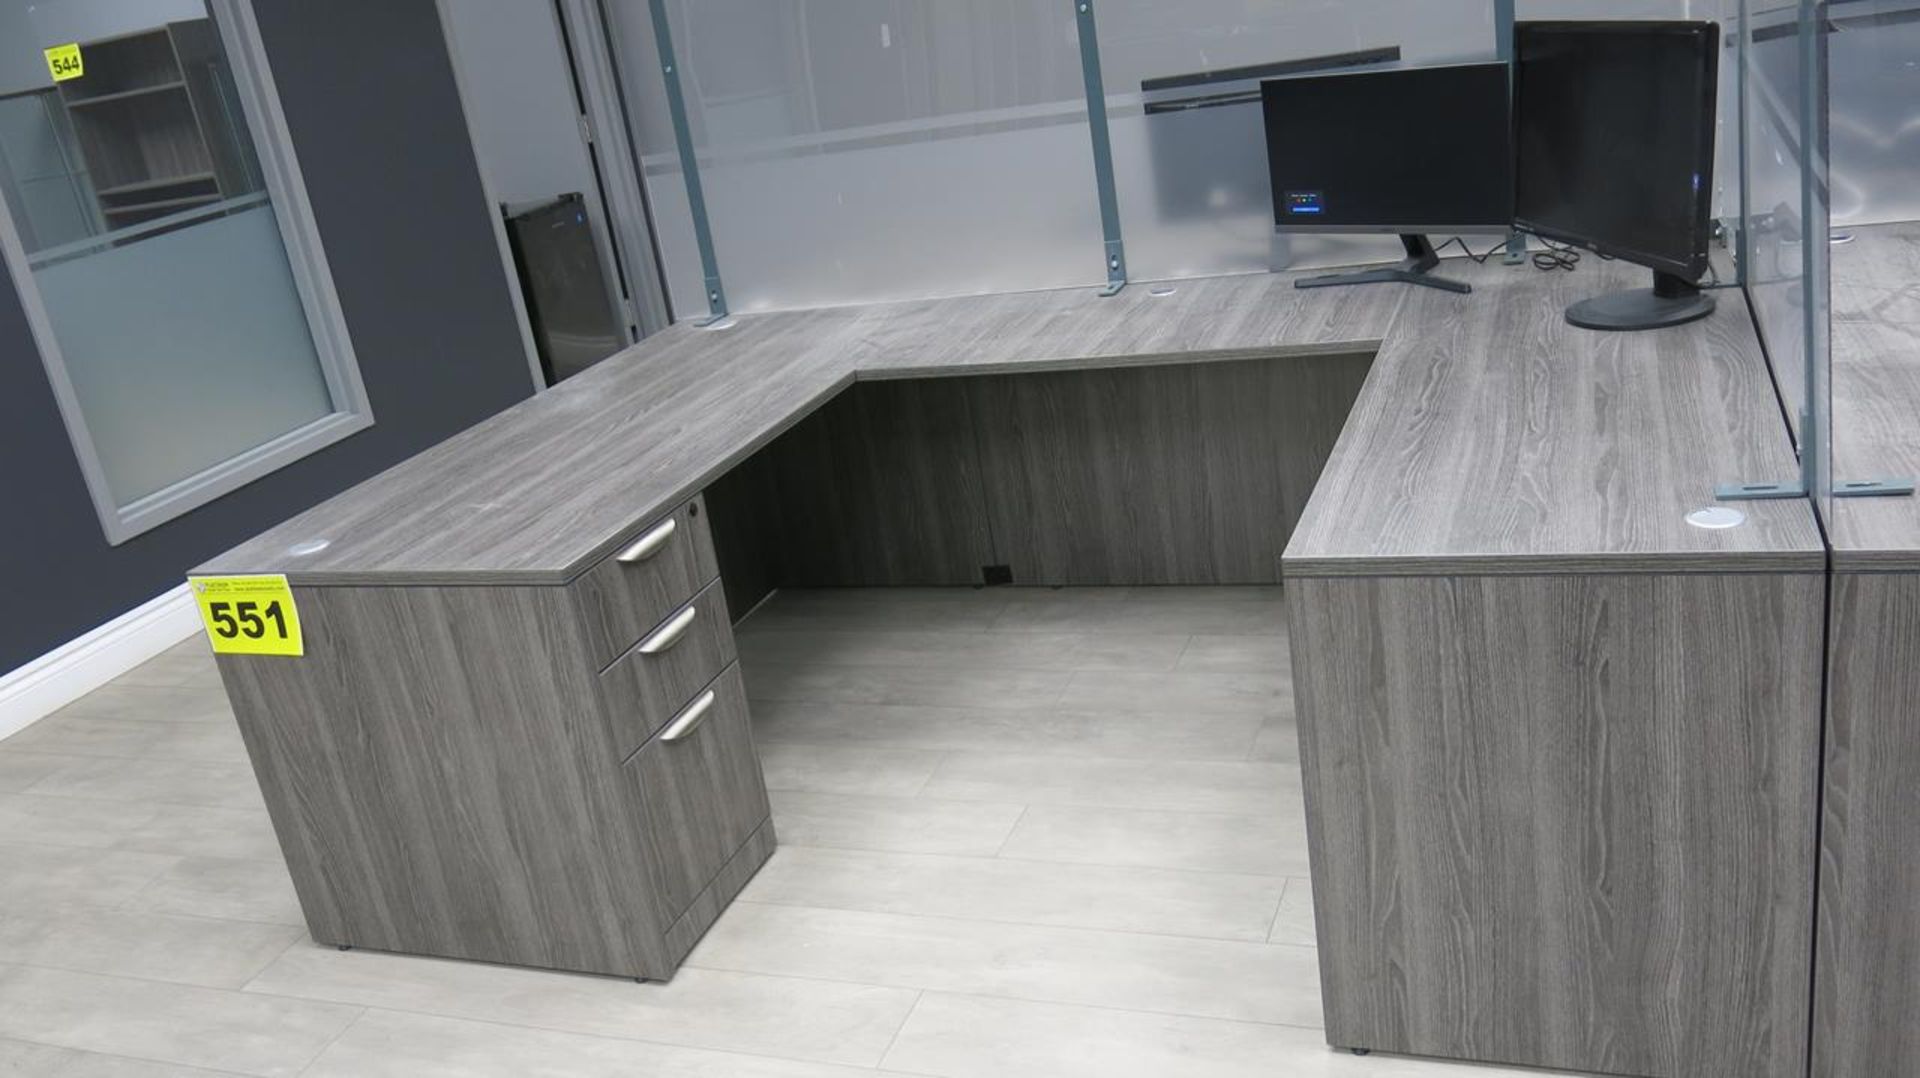 U-SHAPED, GREY, WOOD OFFICE DESK, (L,W,H) 5' X 5', 30") (MONITORS AND PRINTERS NOT INCLUDED IN - Image 2 of 2